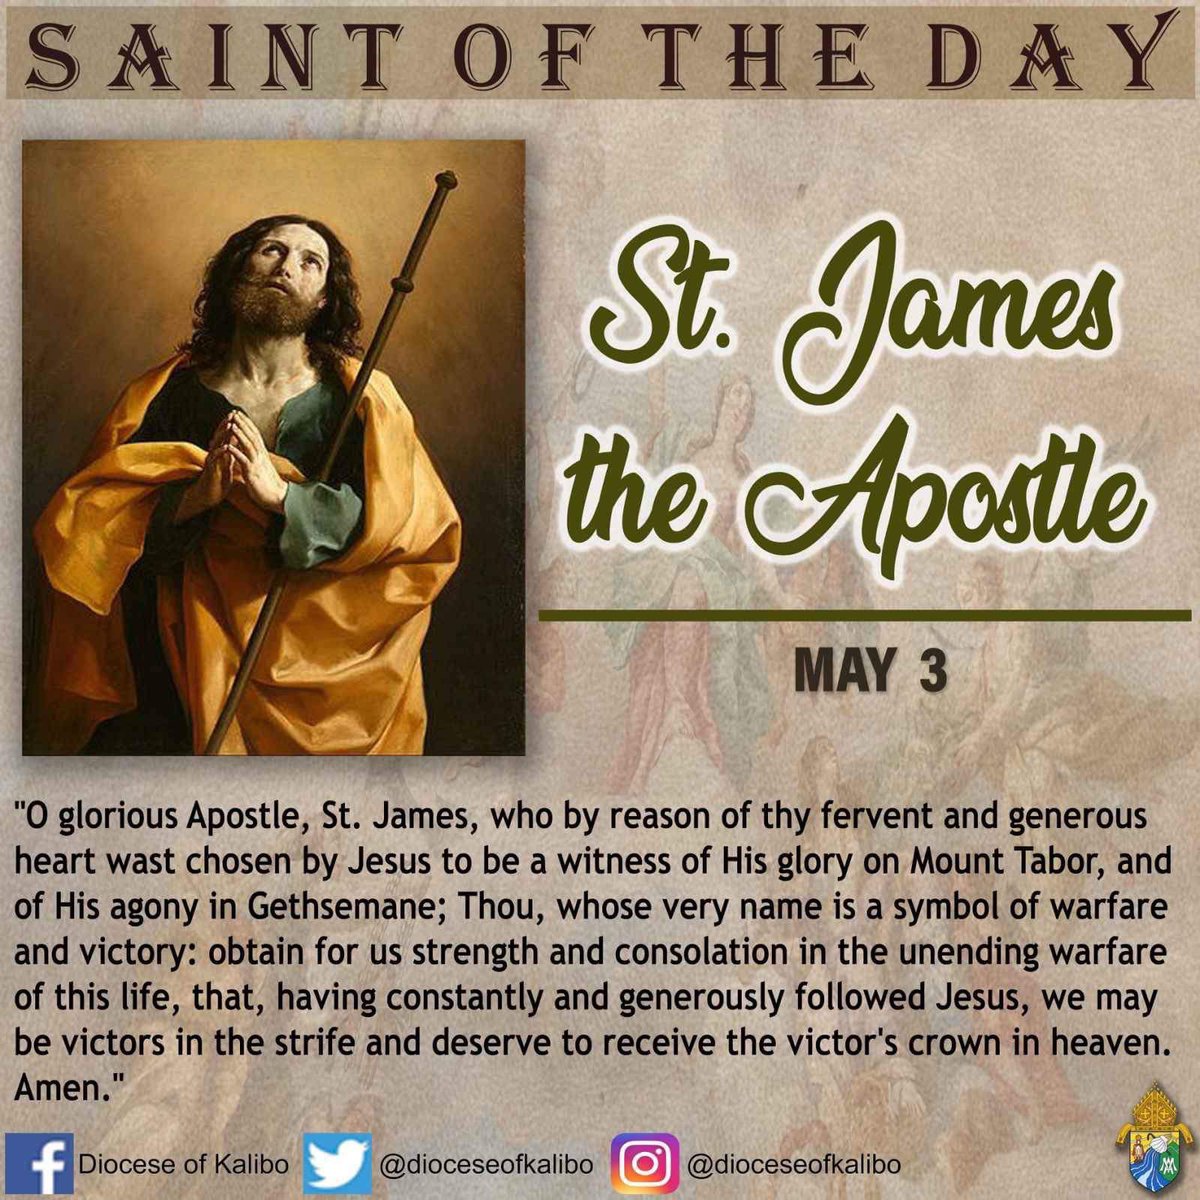 SAINT OF THE DAY

May 3 | St. James the Apostle
 
St. James the Apostle, pray for us! 🙏🏻
 
#SaintOfTheDay #SaintsJamesTheApostle #May3 #Socom #DioceseOfKalibo